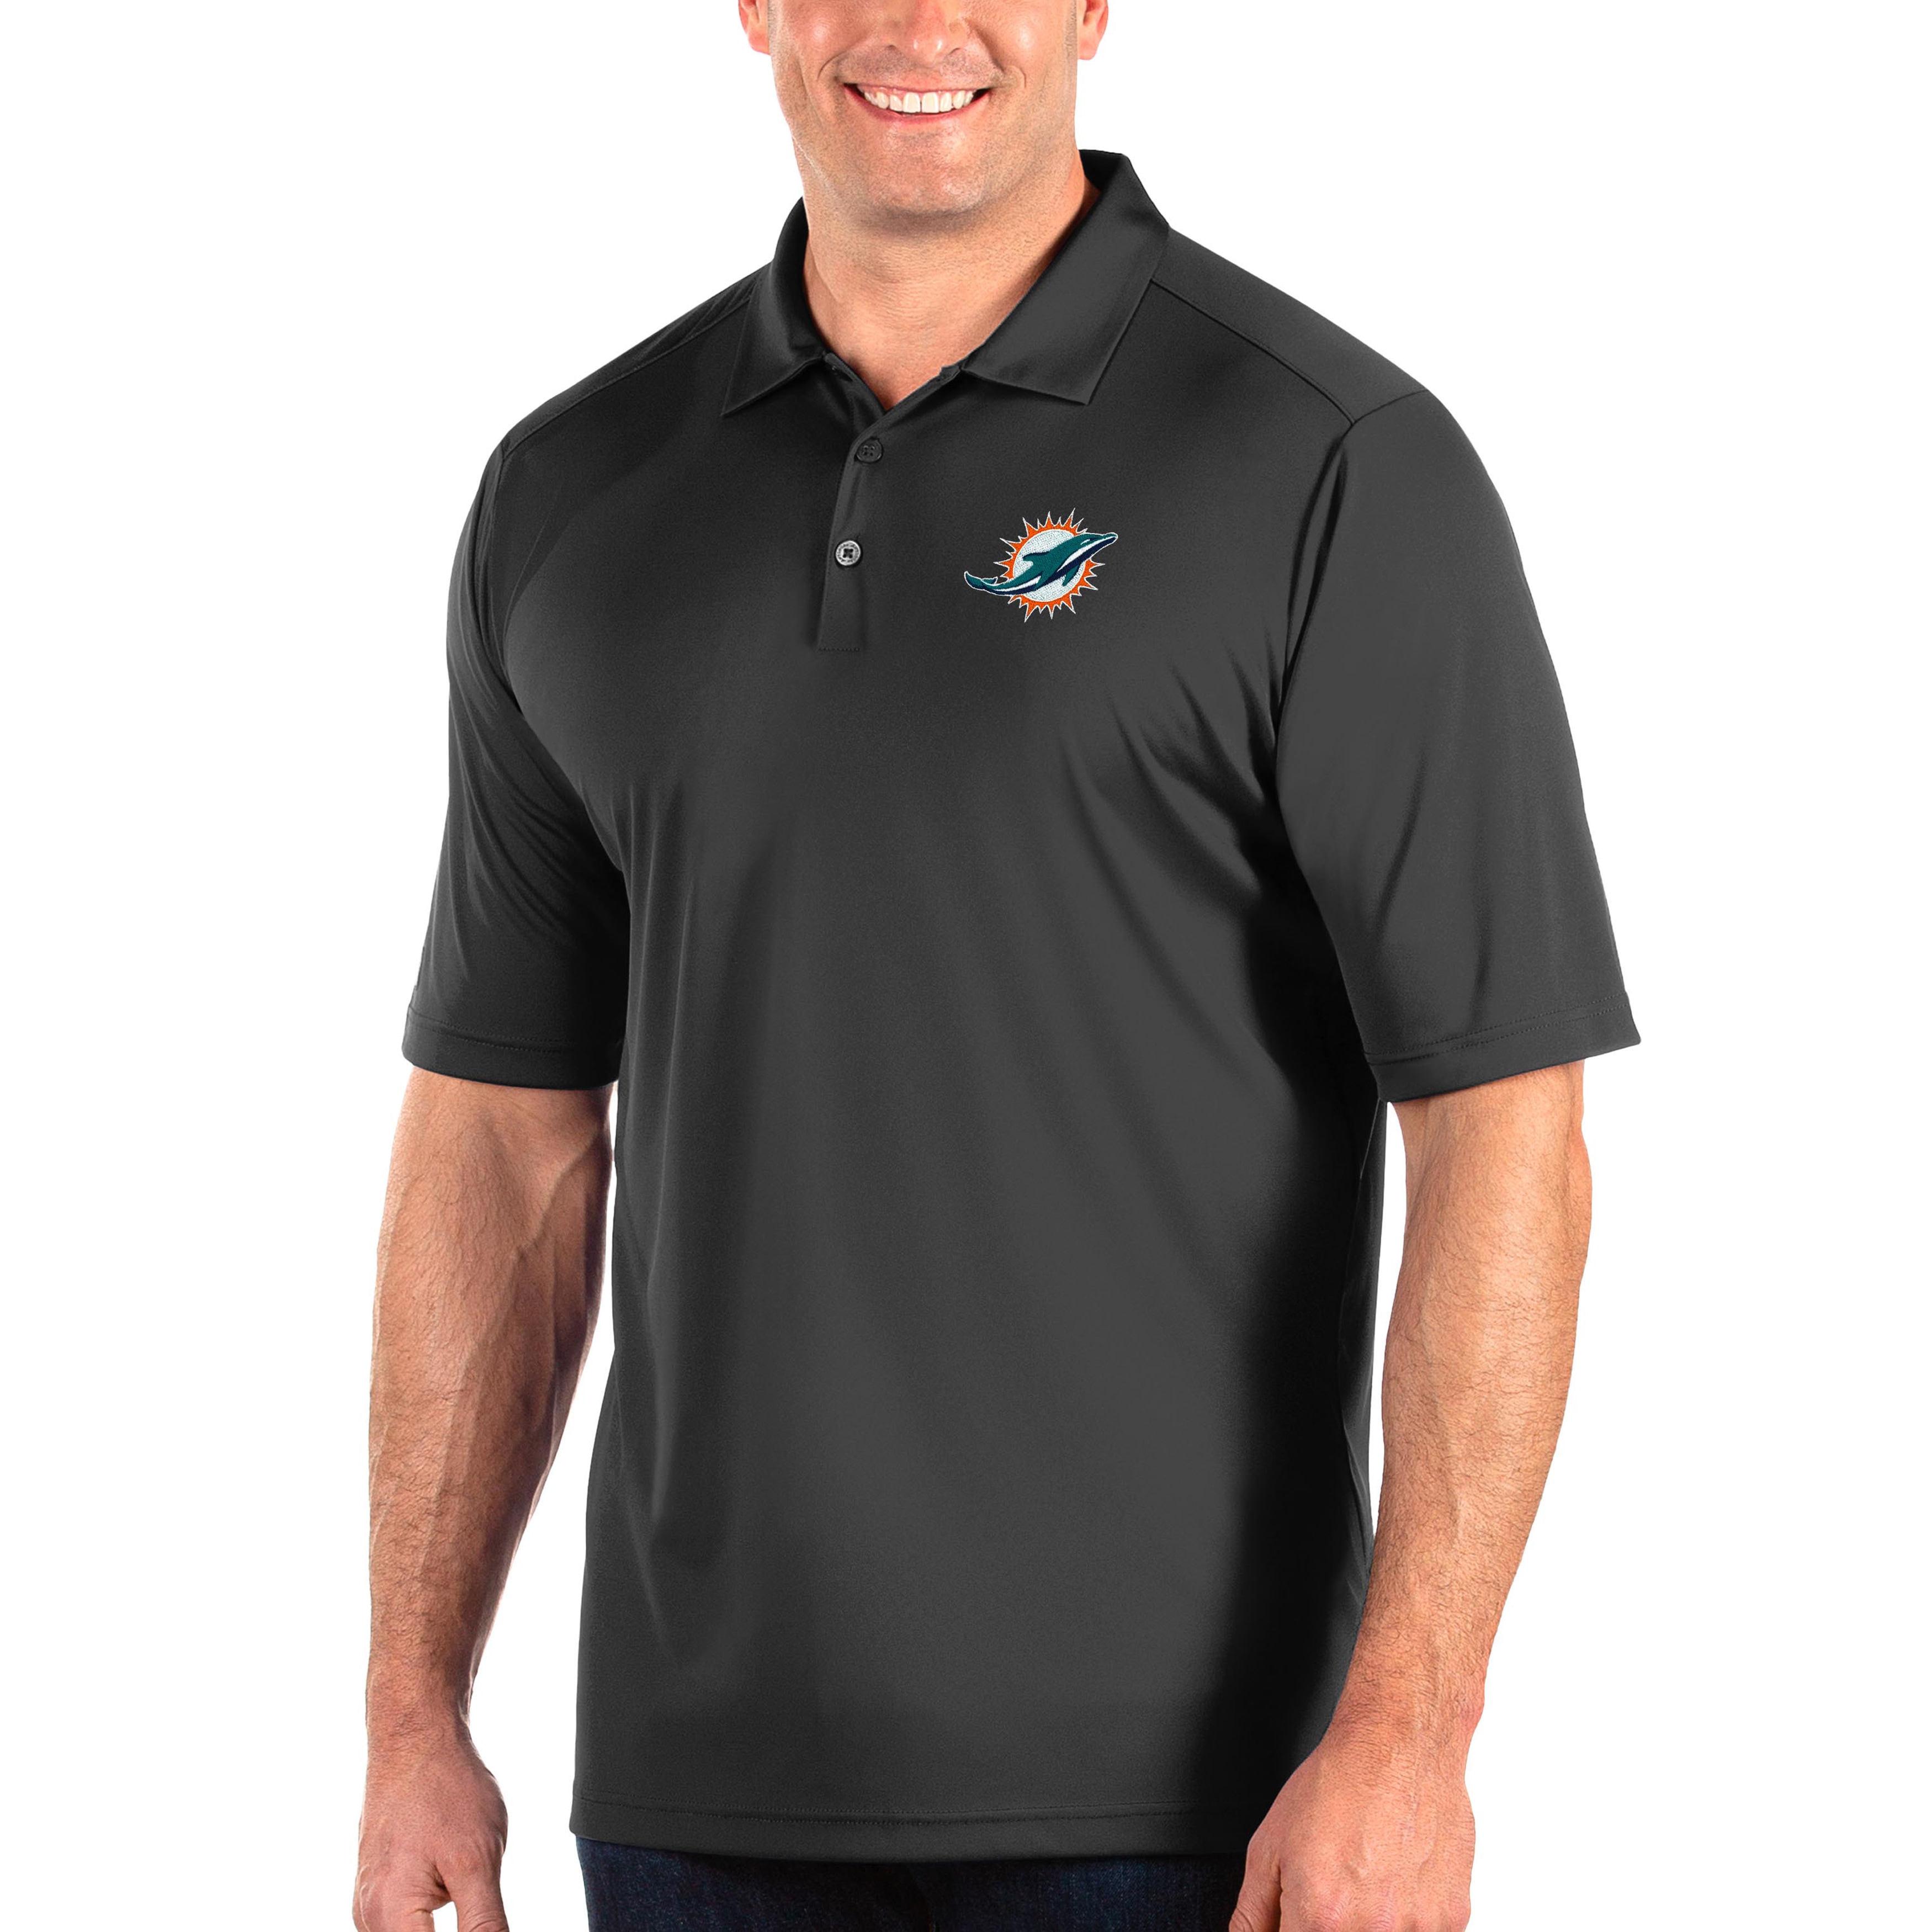 Men's Antigua Charcoal Miami Dolphins Tribute Big & Tall Polo - image 1 of 1